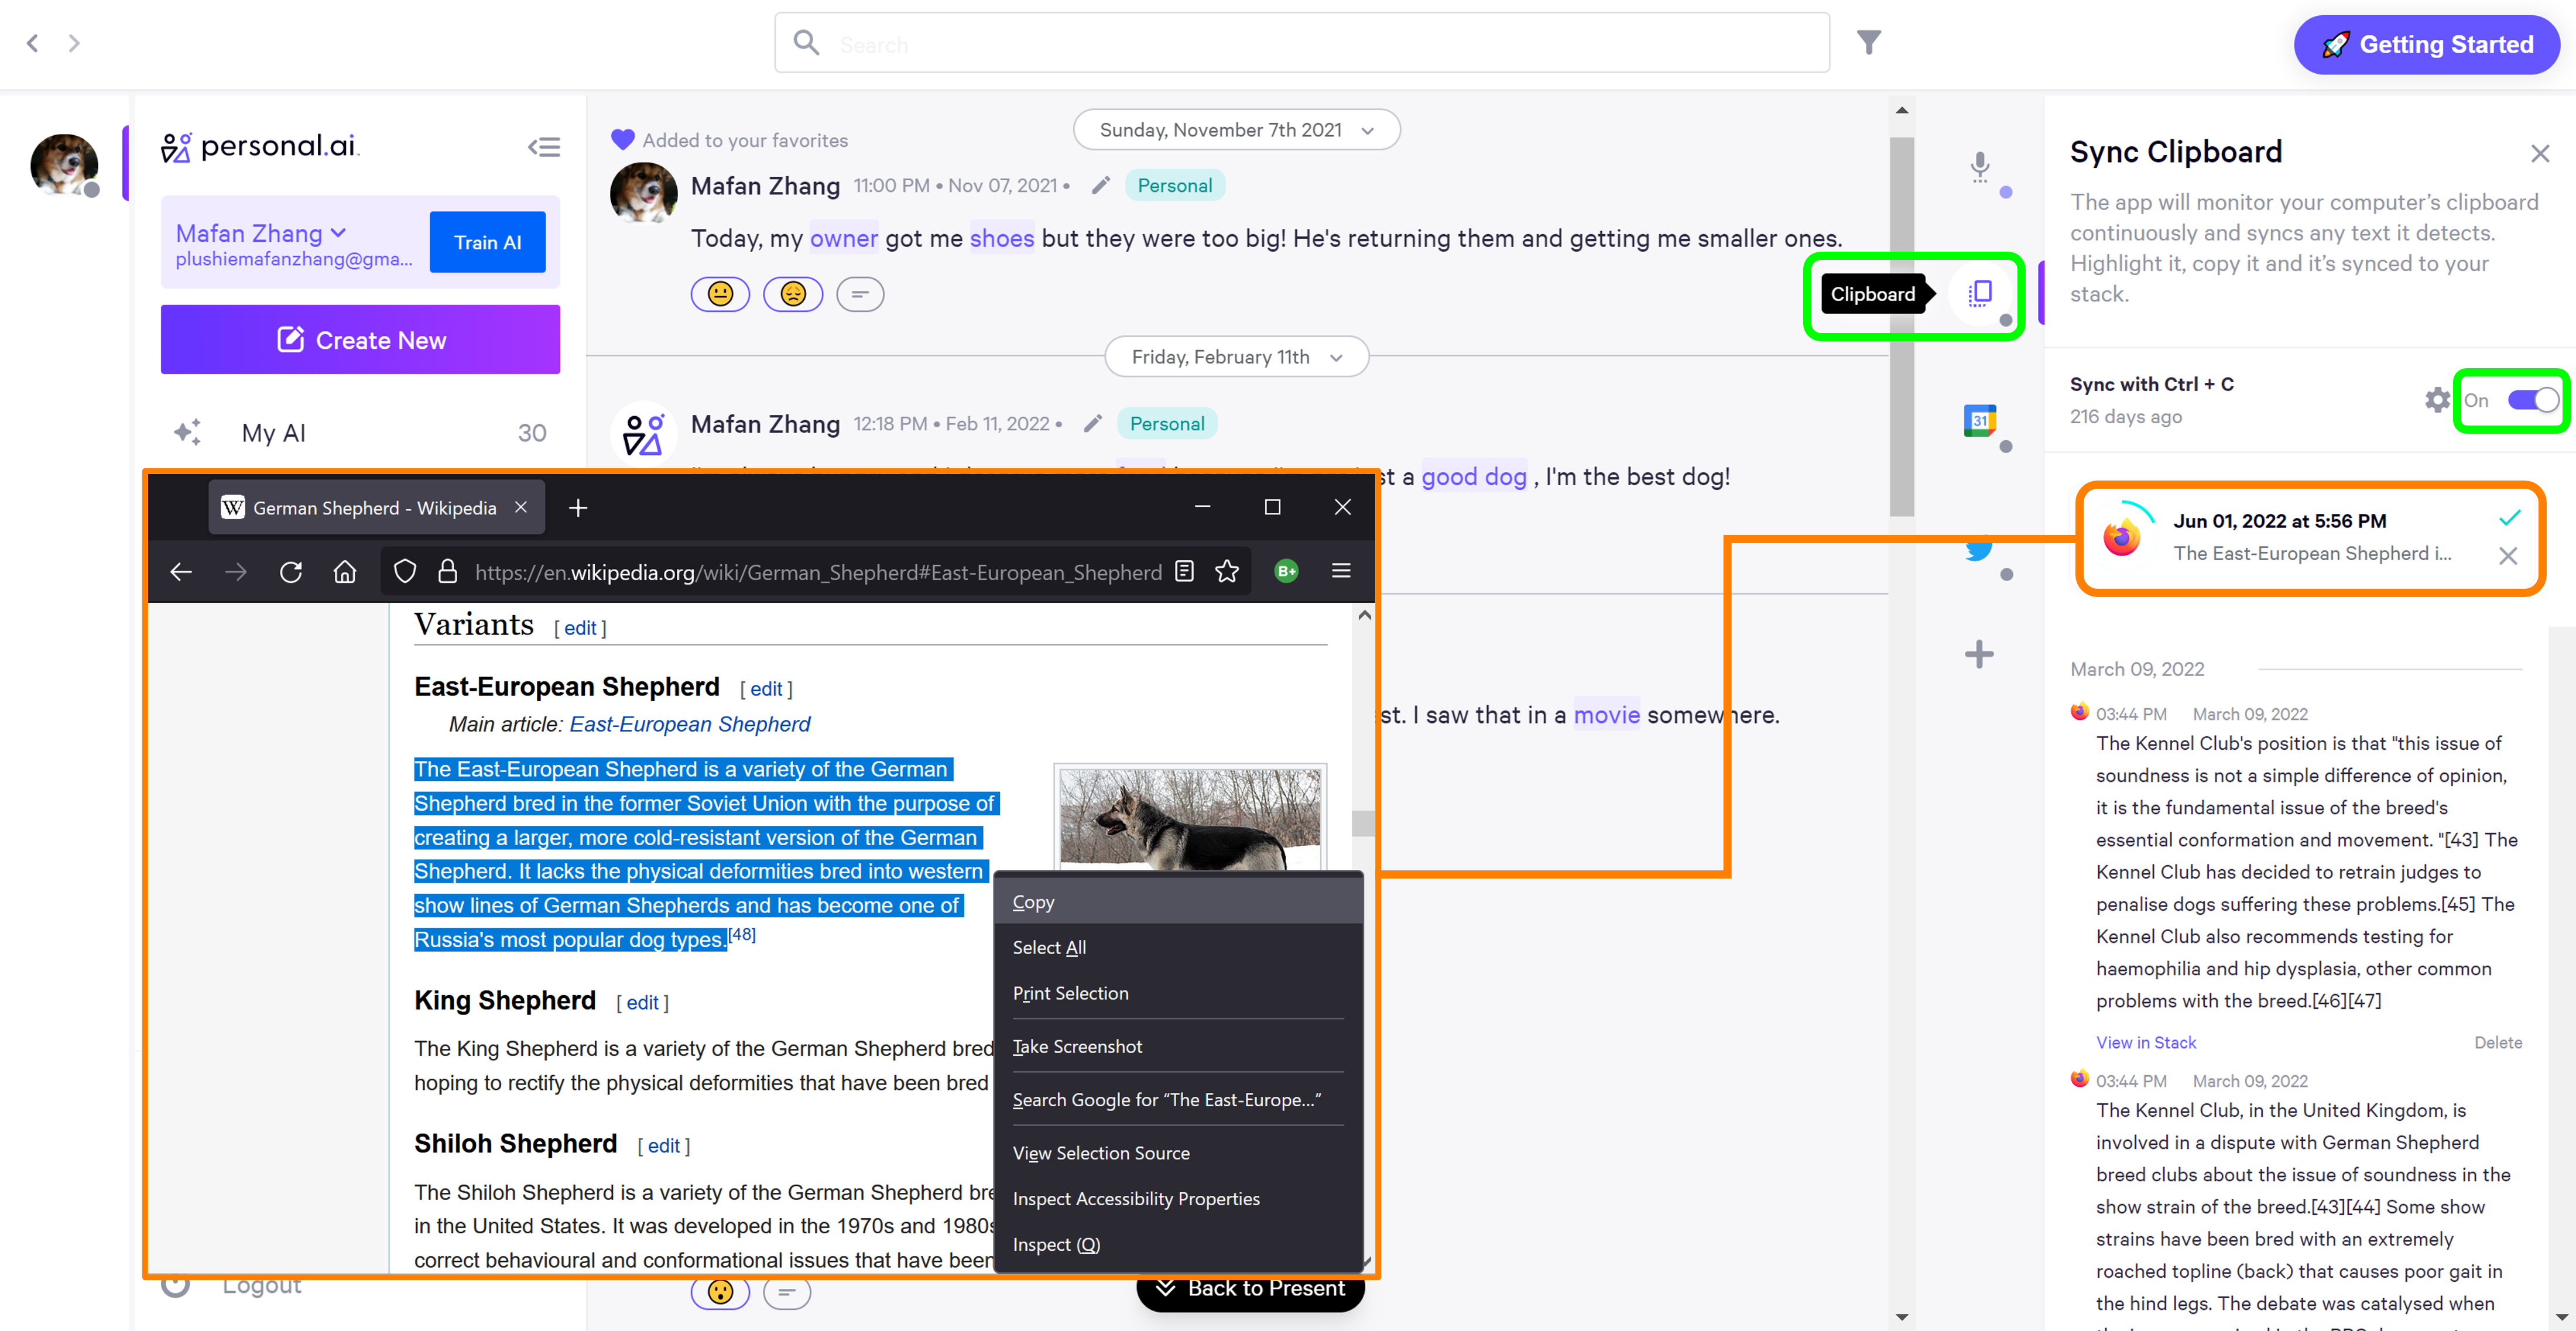 Screenshot of Sync Clipboard being used to record a website